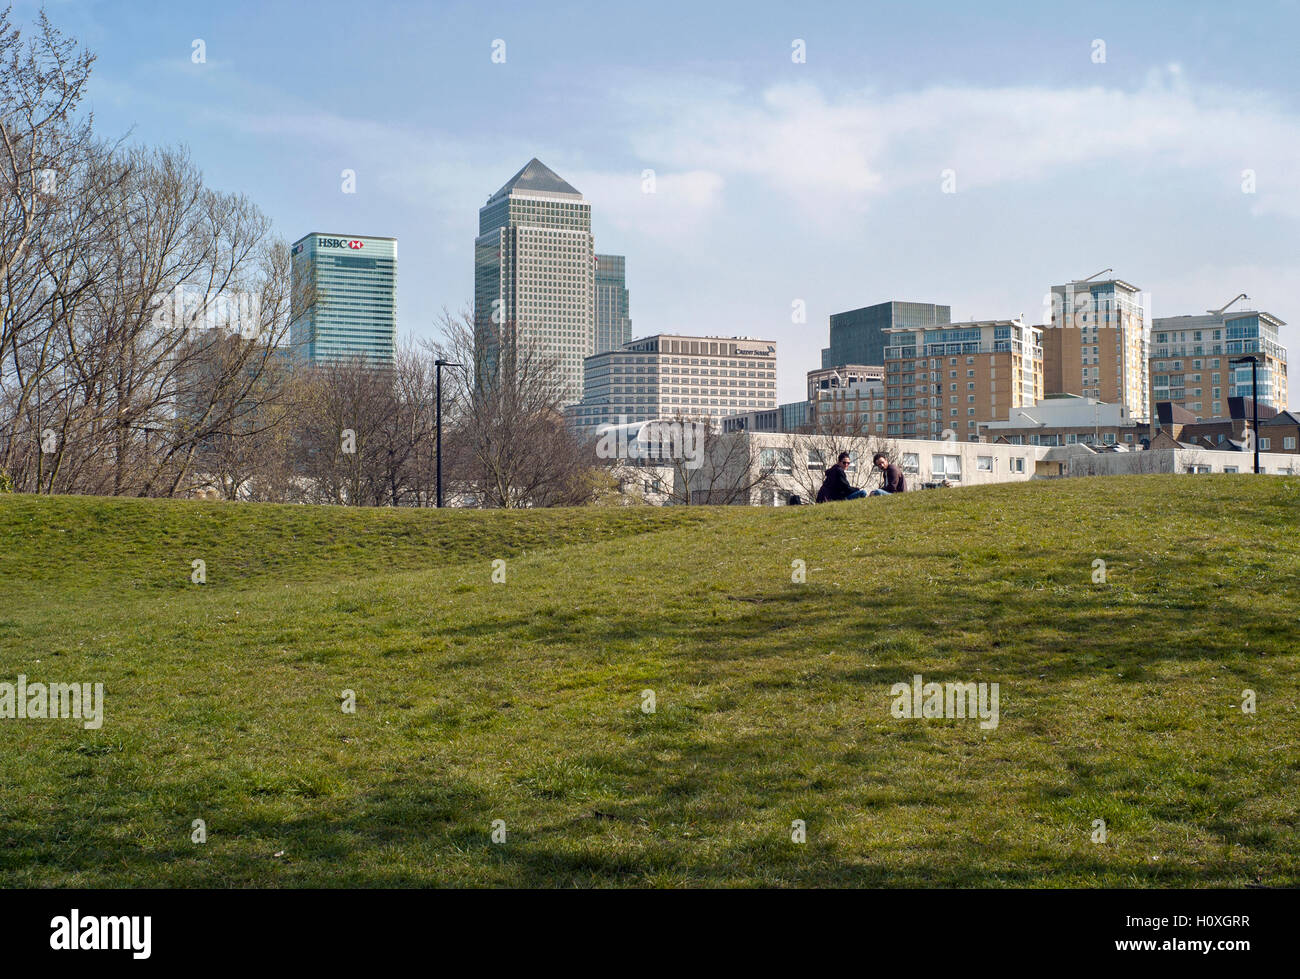 Canary Wharf, London as seen from a Park in Poplar London Stock Photo